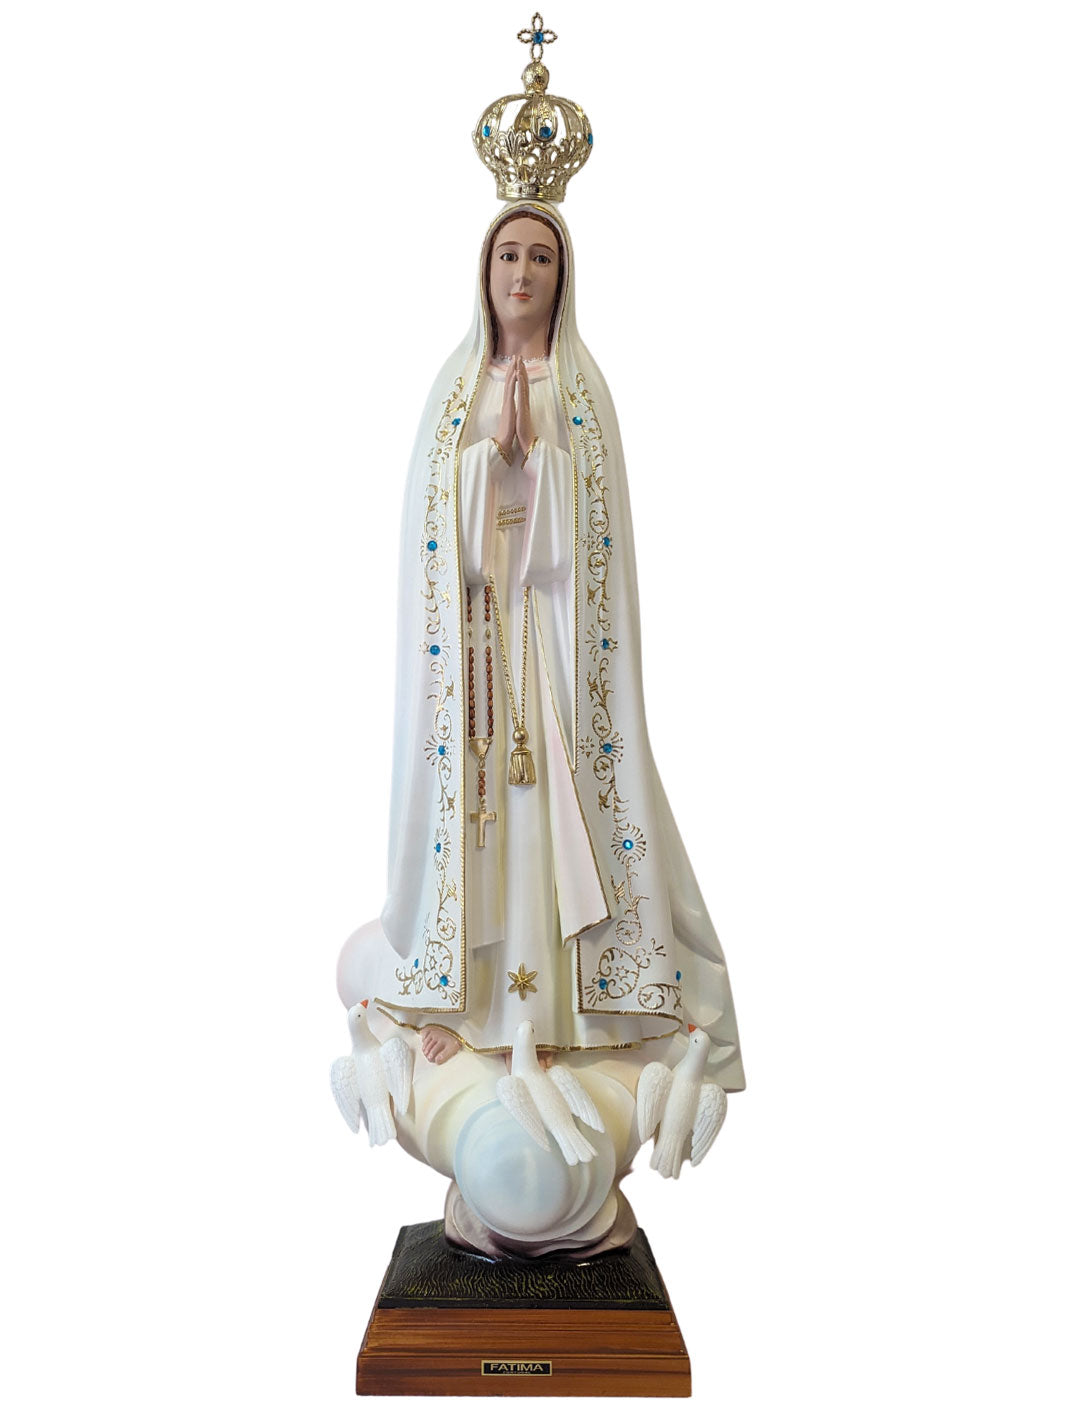 40 Inch Glass Eyes Our Lady of Fatima Statue Made in Portugal